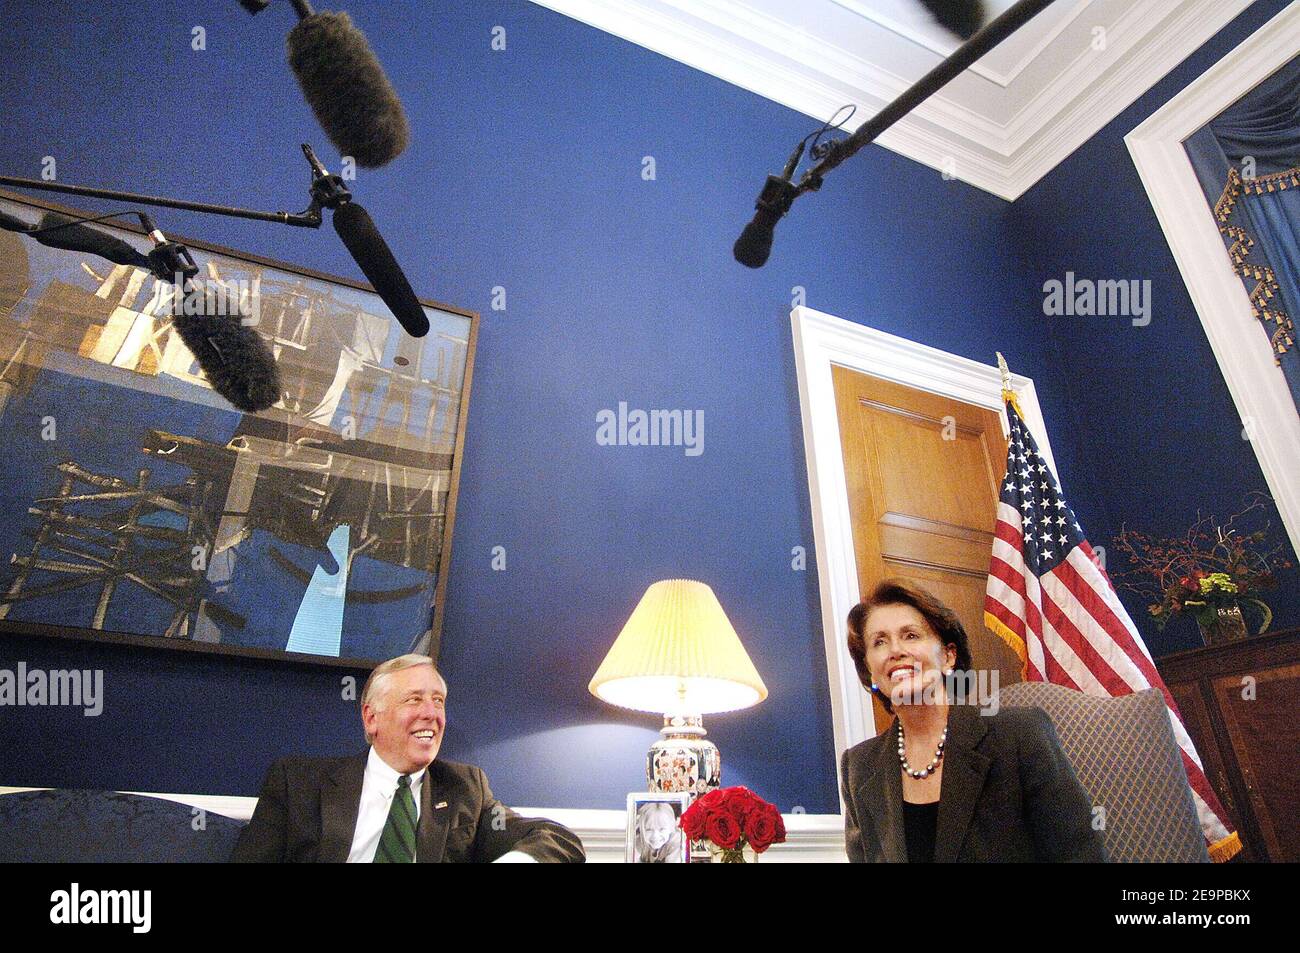 US House Majority Leader-elect Steny Hoyer (D-MD) talks with Speaker of the  House-designate Nancy Pelosi (D-CA) after a meeting in Pelosi's office in  the Capitol November 20, 2006 in Washington, DC. Hoyer